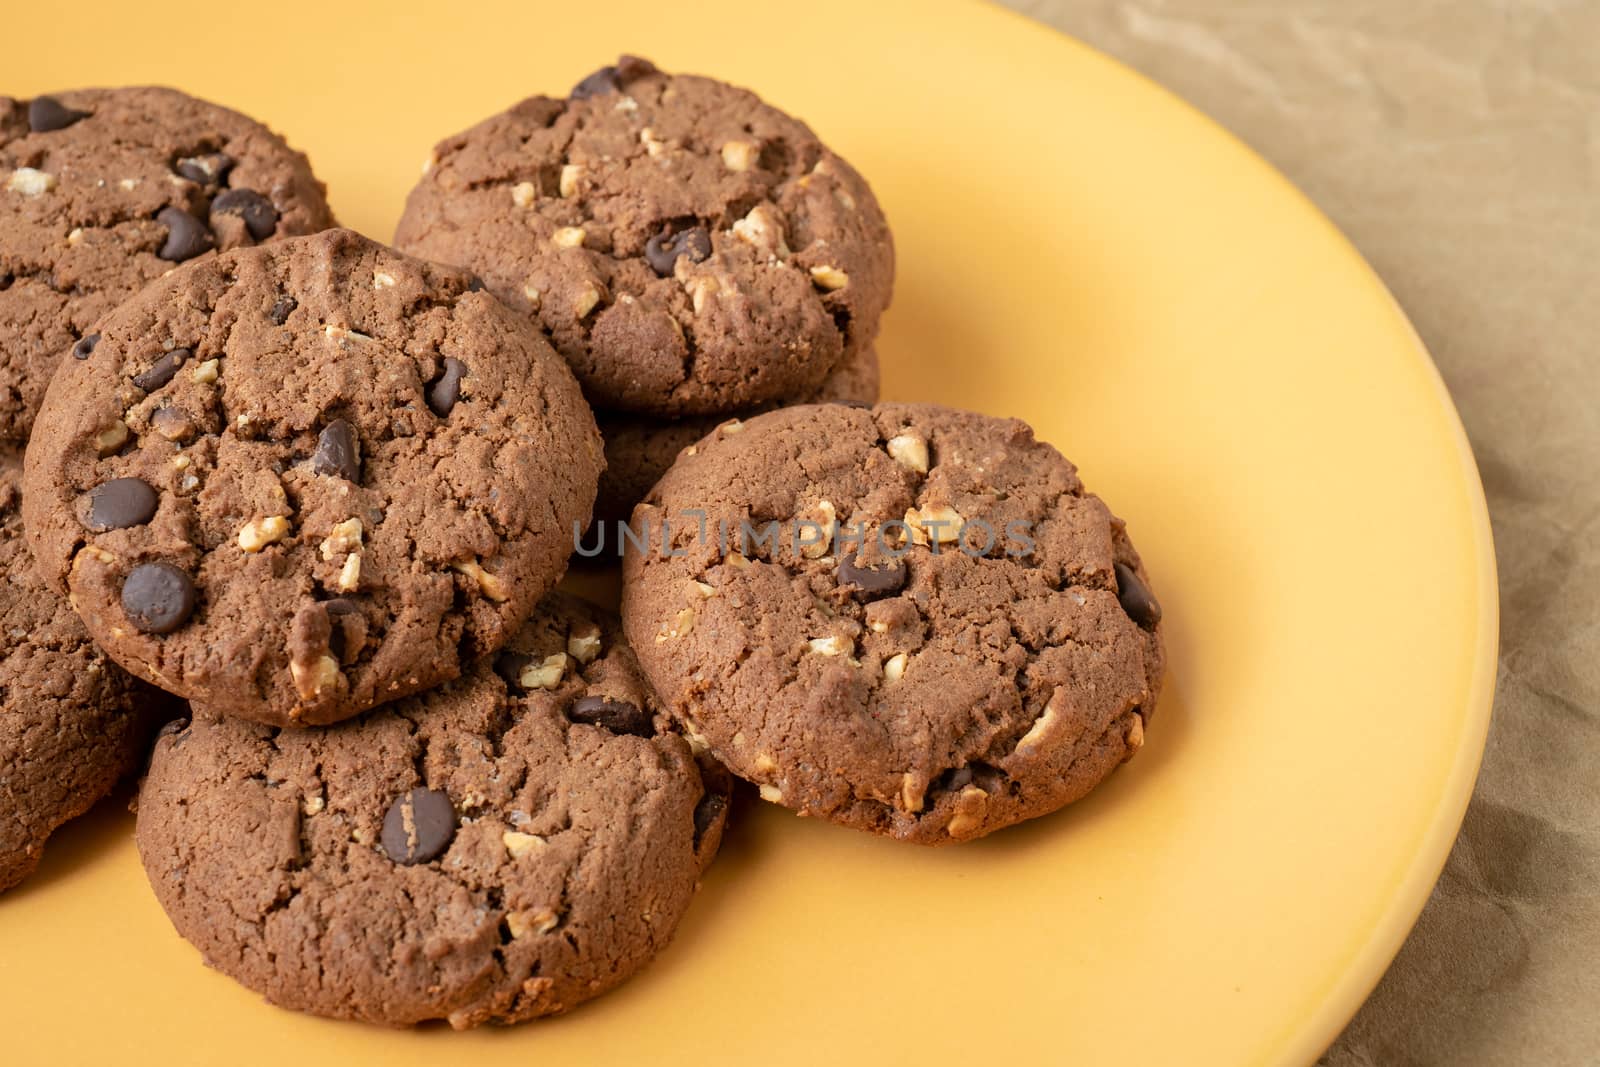 Chocolate cookies on plate by xtrekx